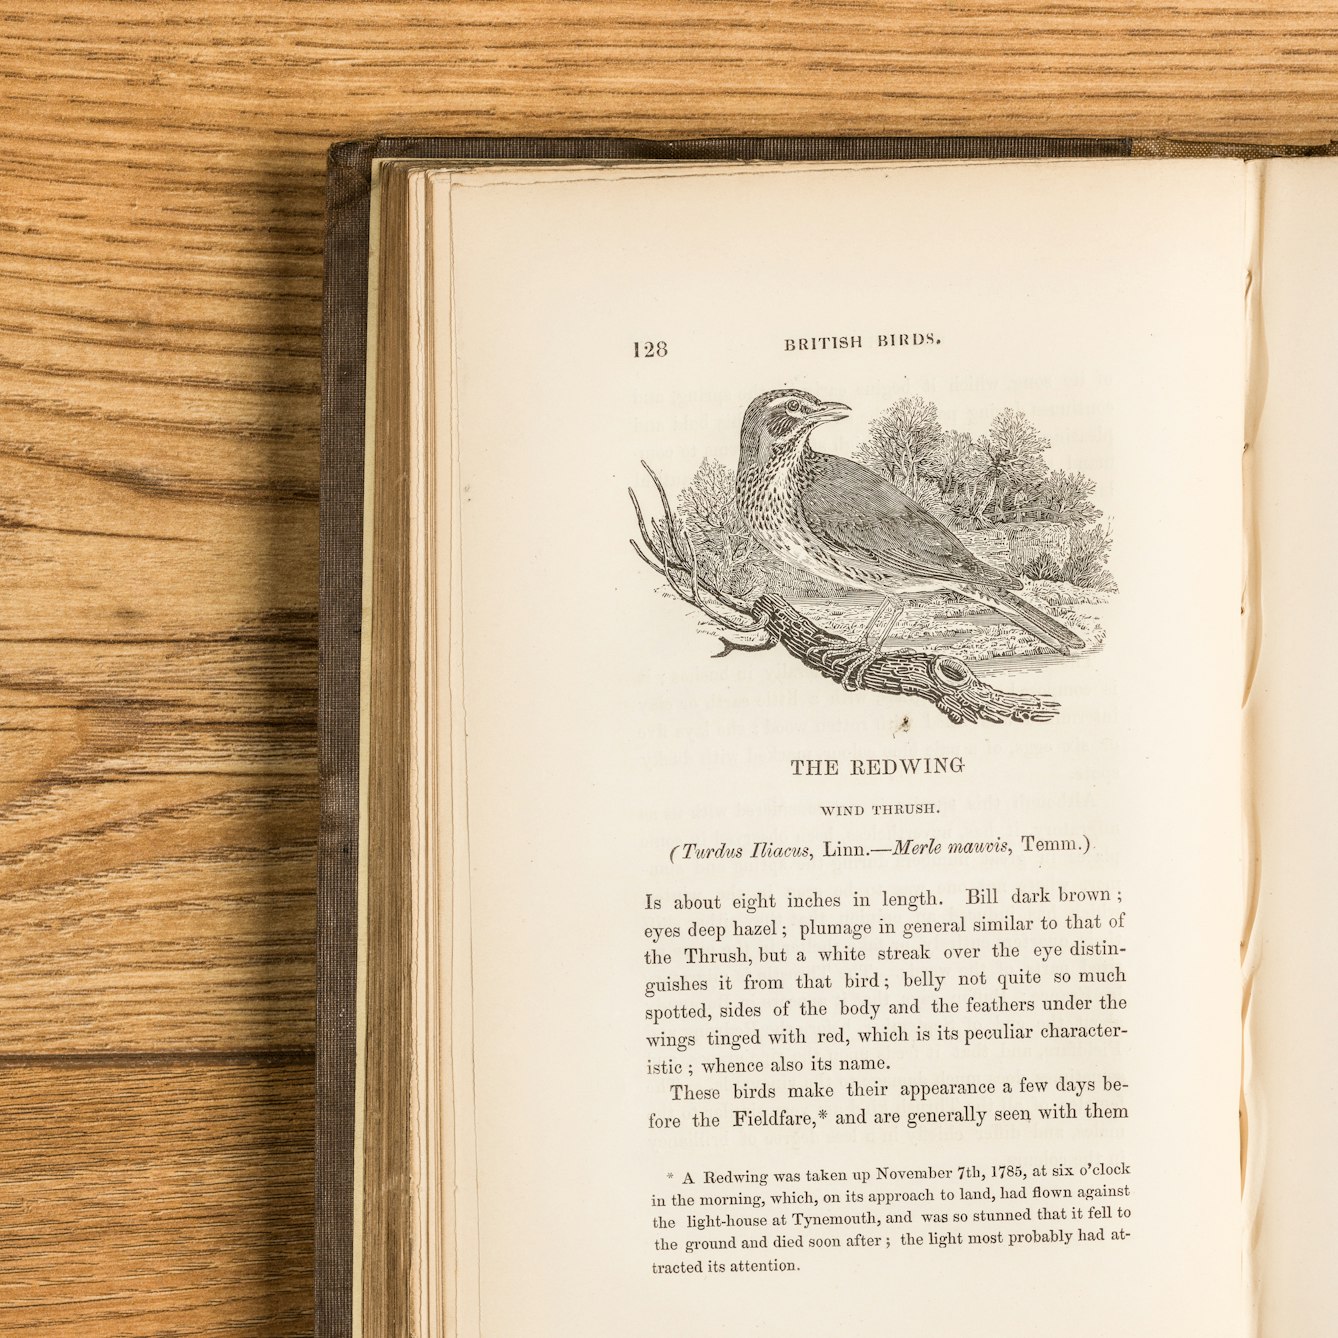 Photograph of the left hand page of an open book on a wooden surface. The left hand page shows an engraving of a Redwing bird in a woodland scene. Below the engraving is a descriptive text about the bird.